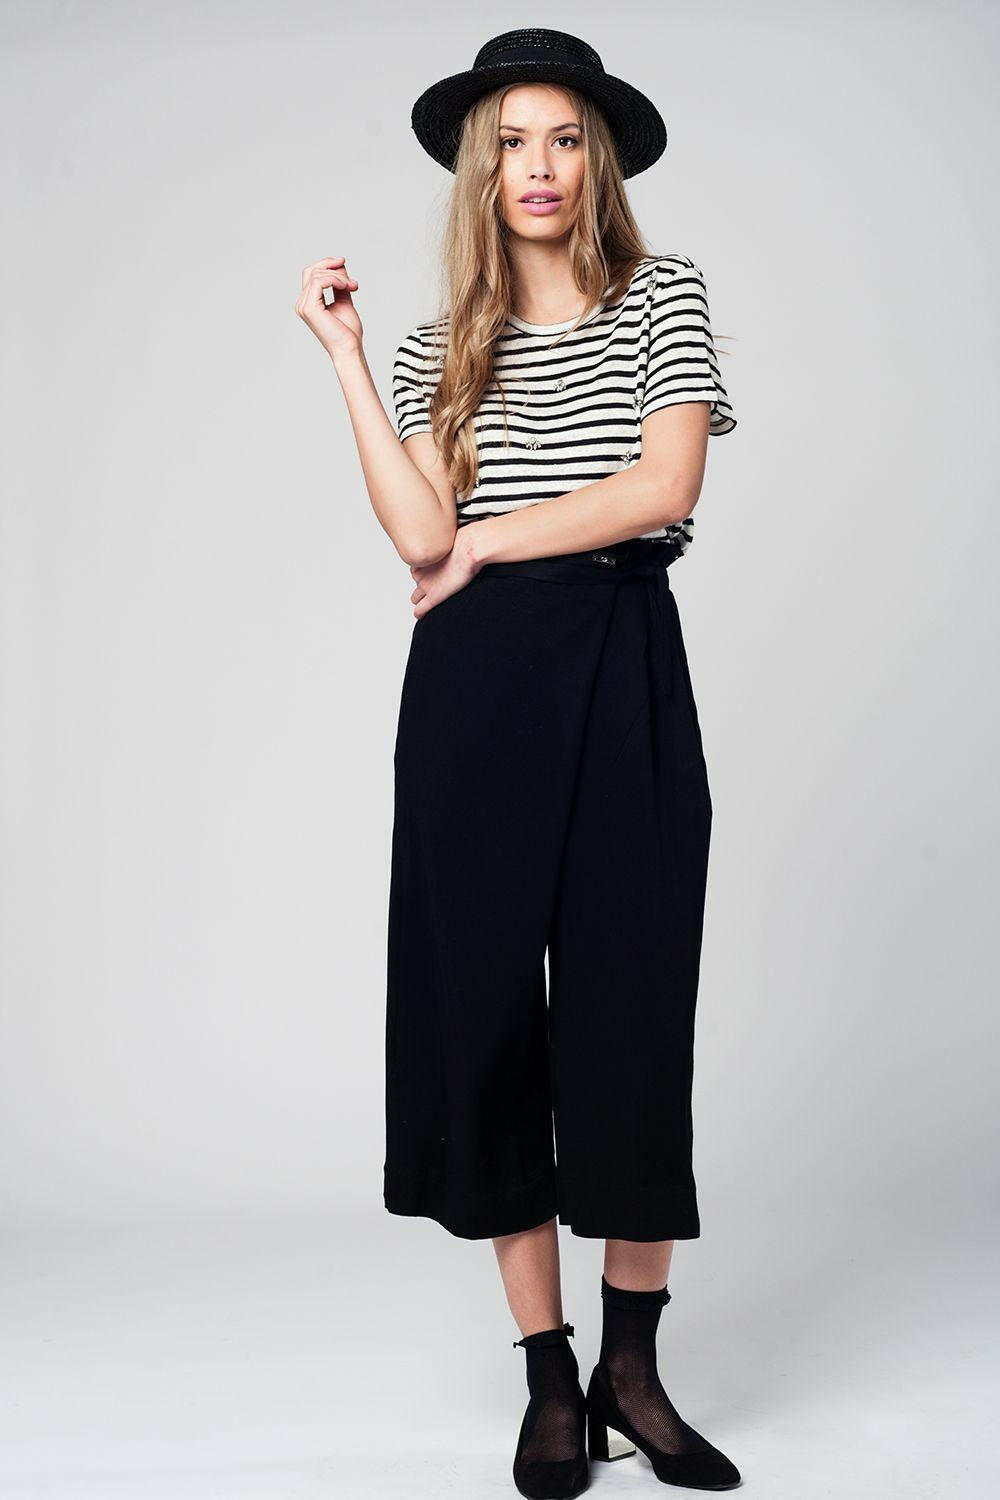 Black Culotte With Tie Waist and Stretch Back - Genuine Authentic Brand